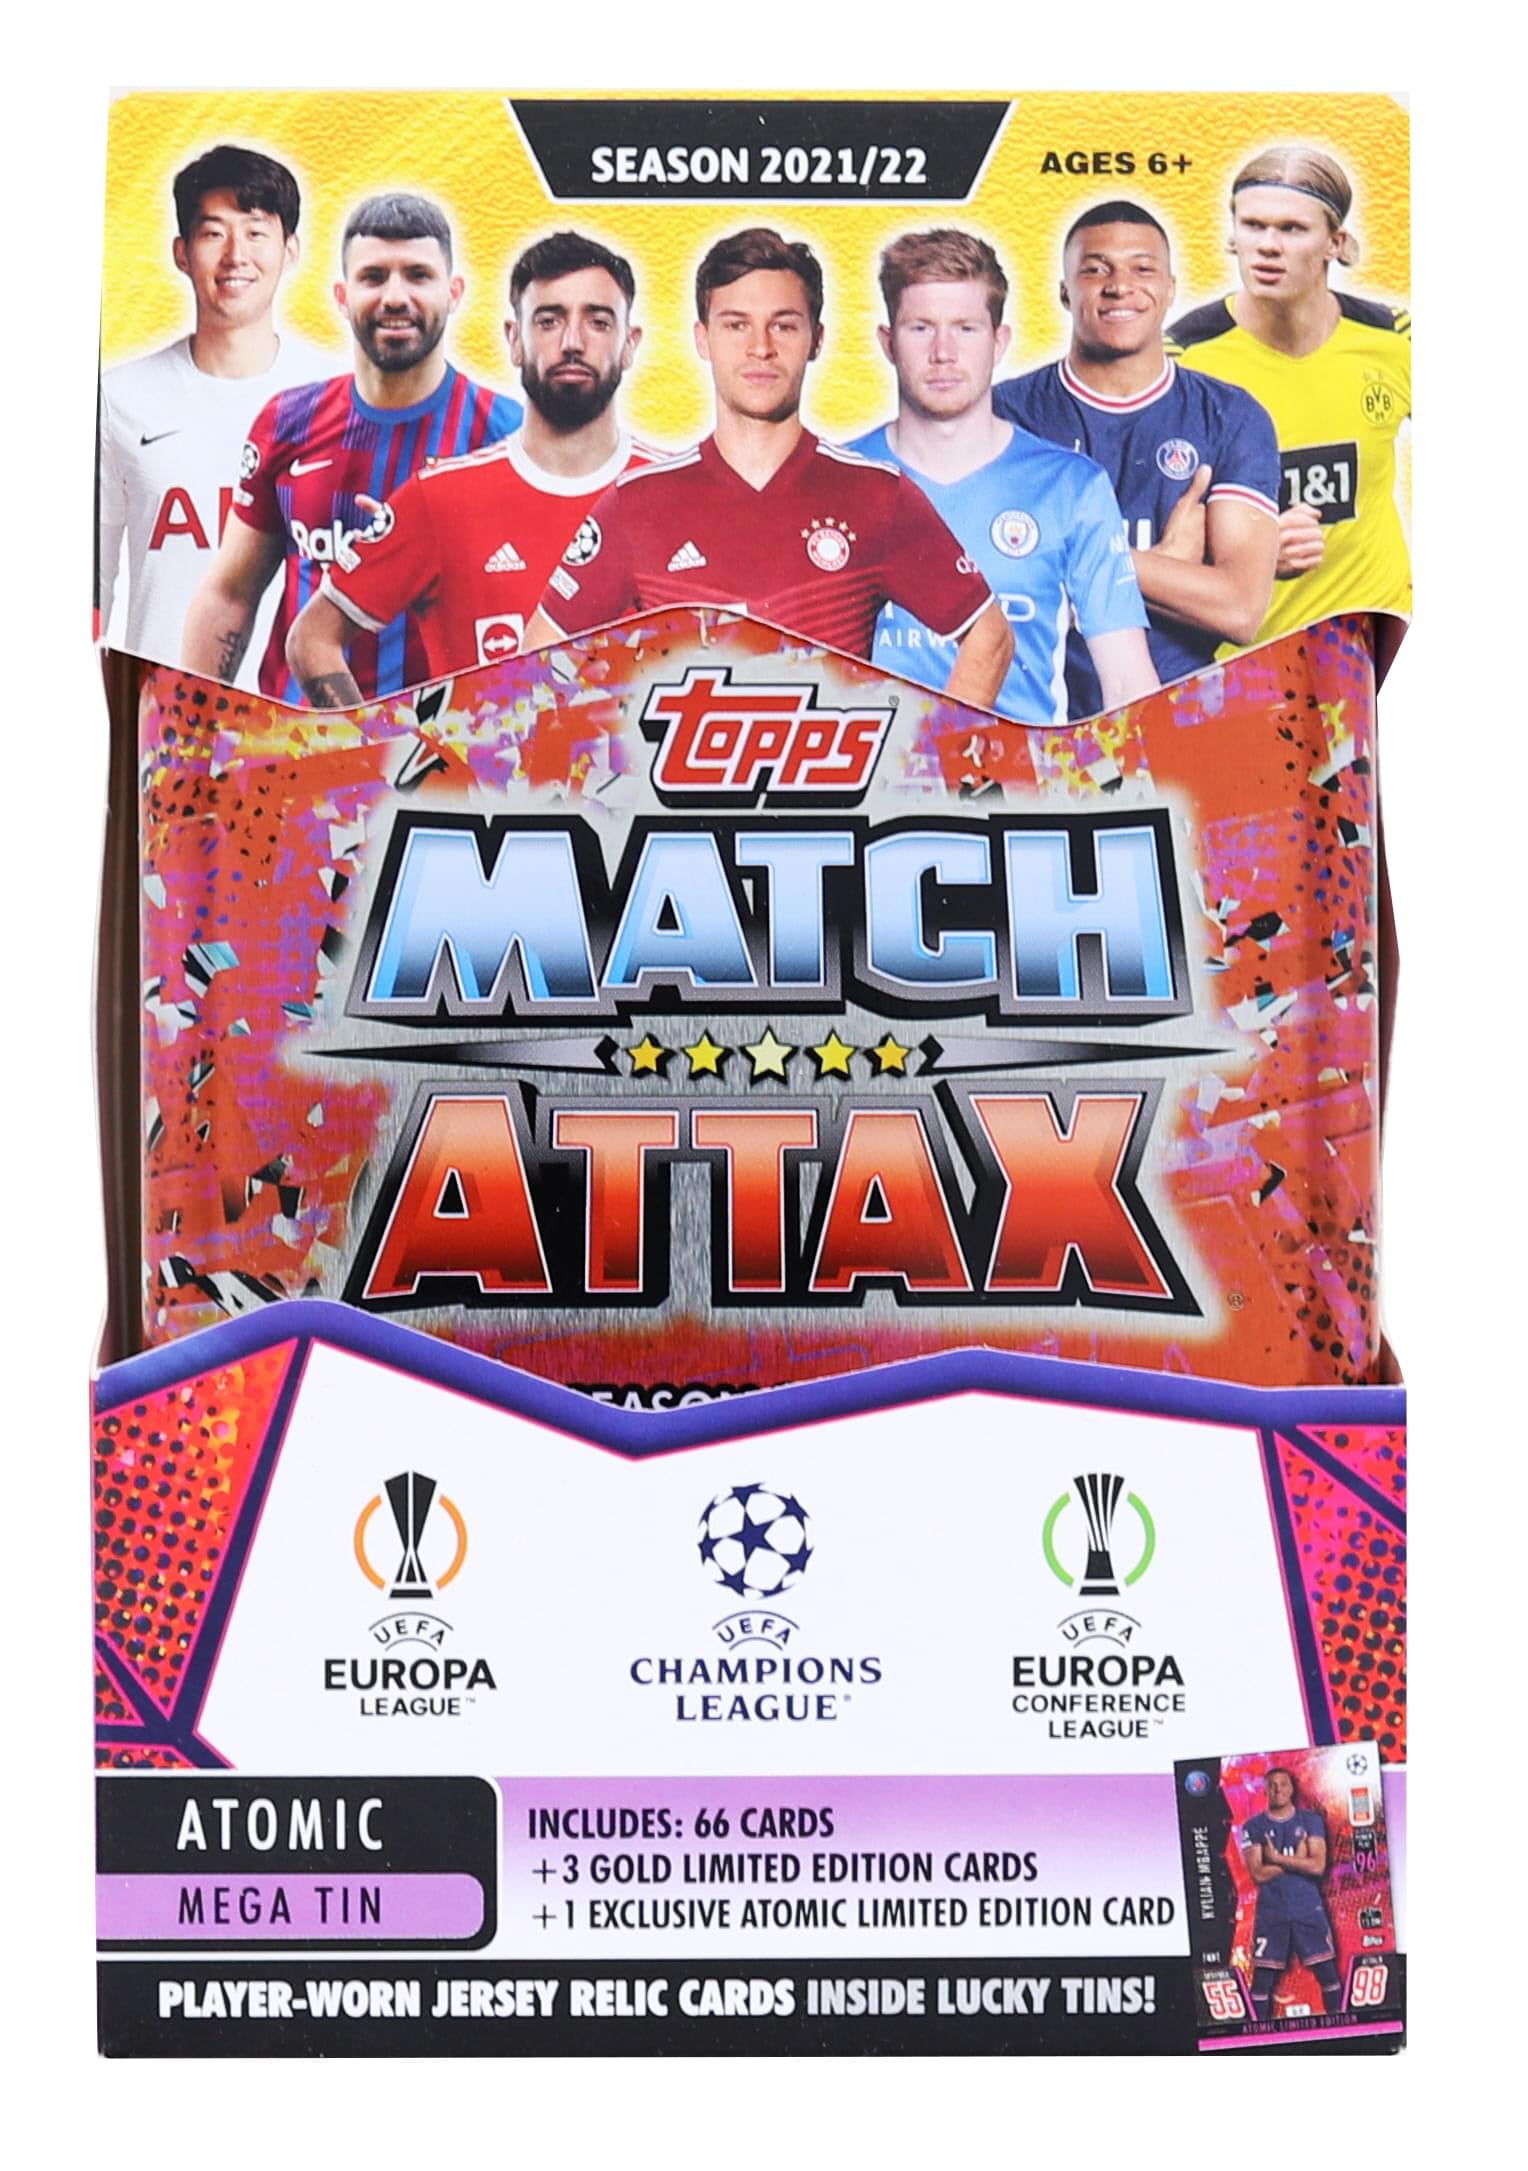 1 Gold Limited Edition Topps Match Attax 2020/21 Trading Cards Game Mega Tins 